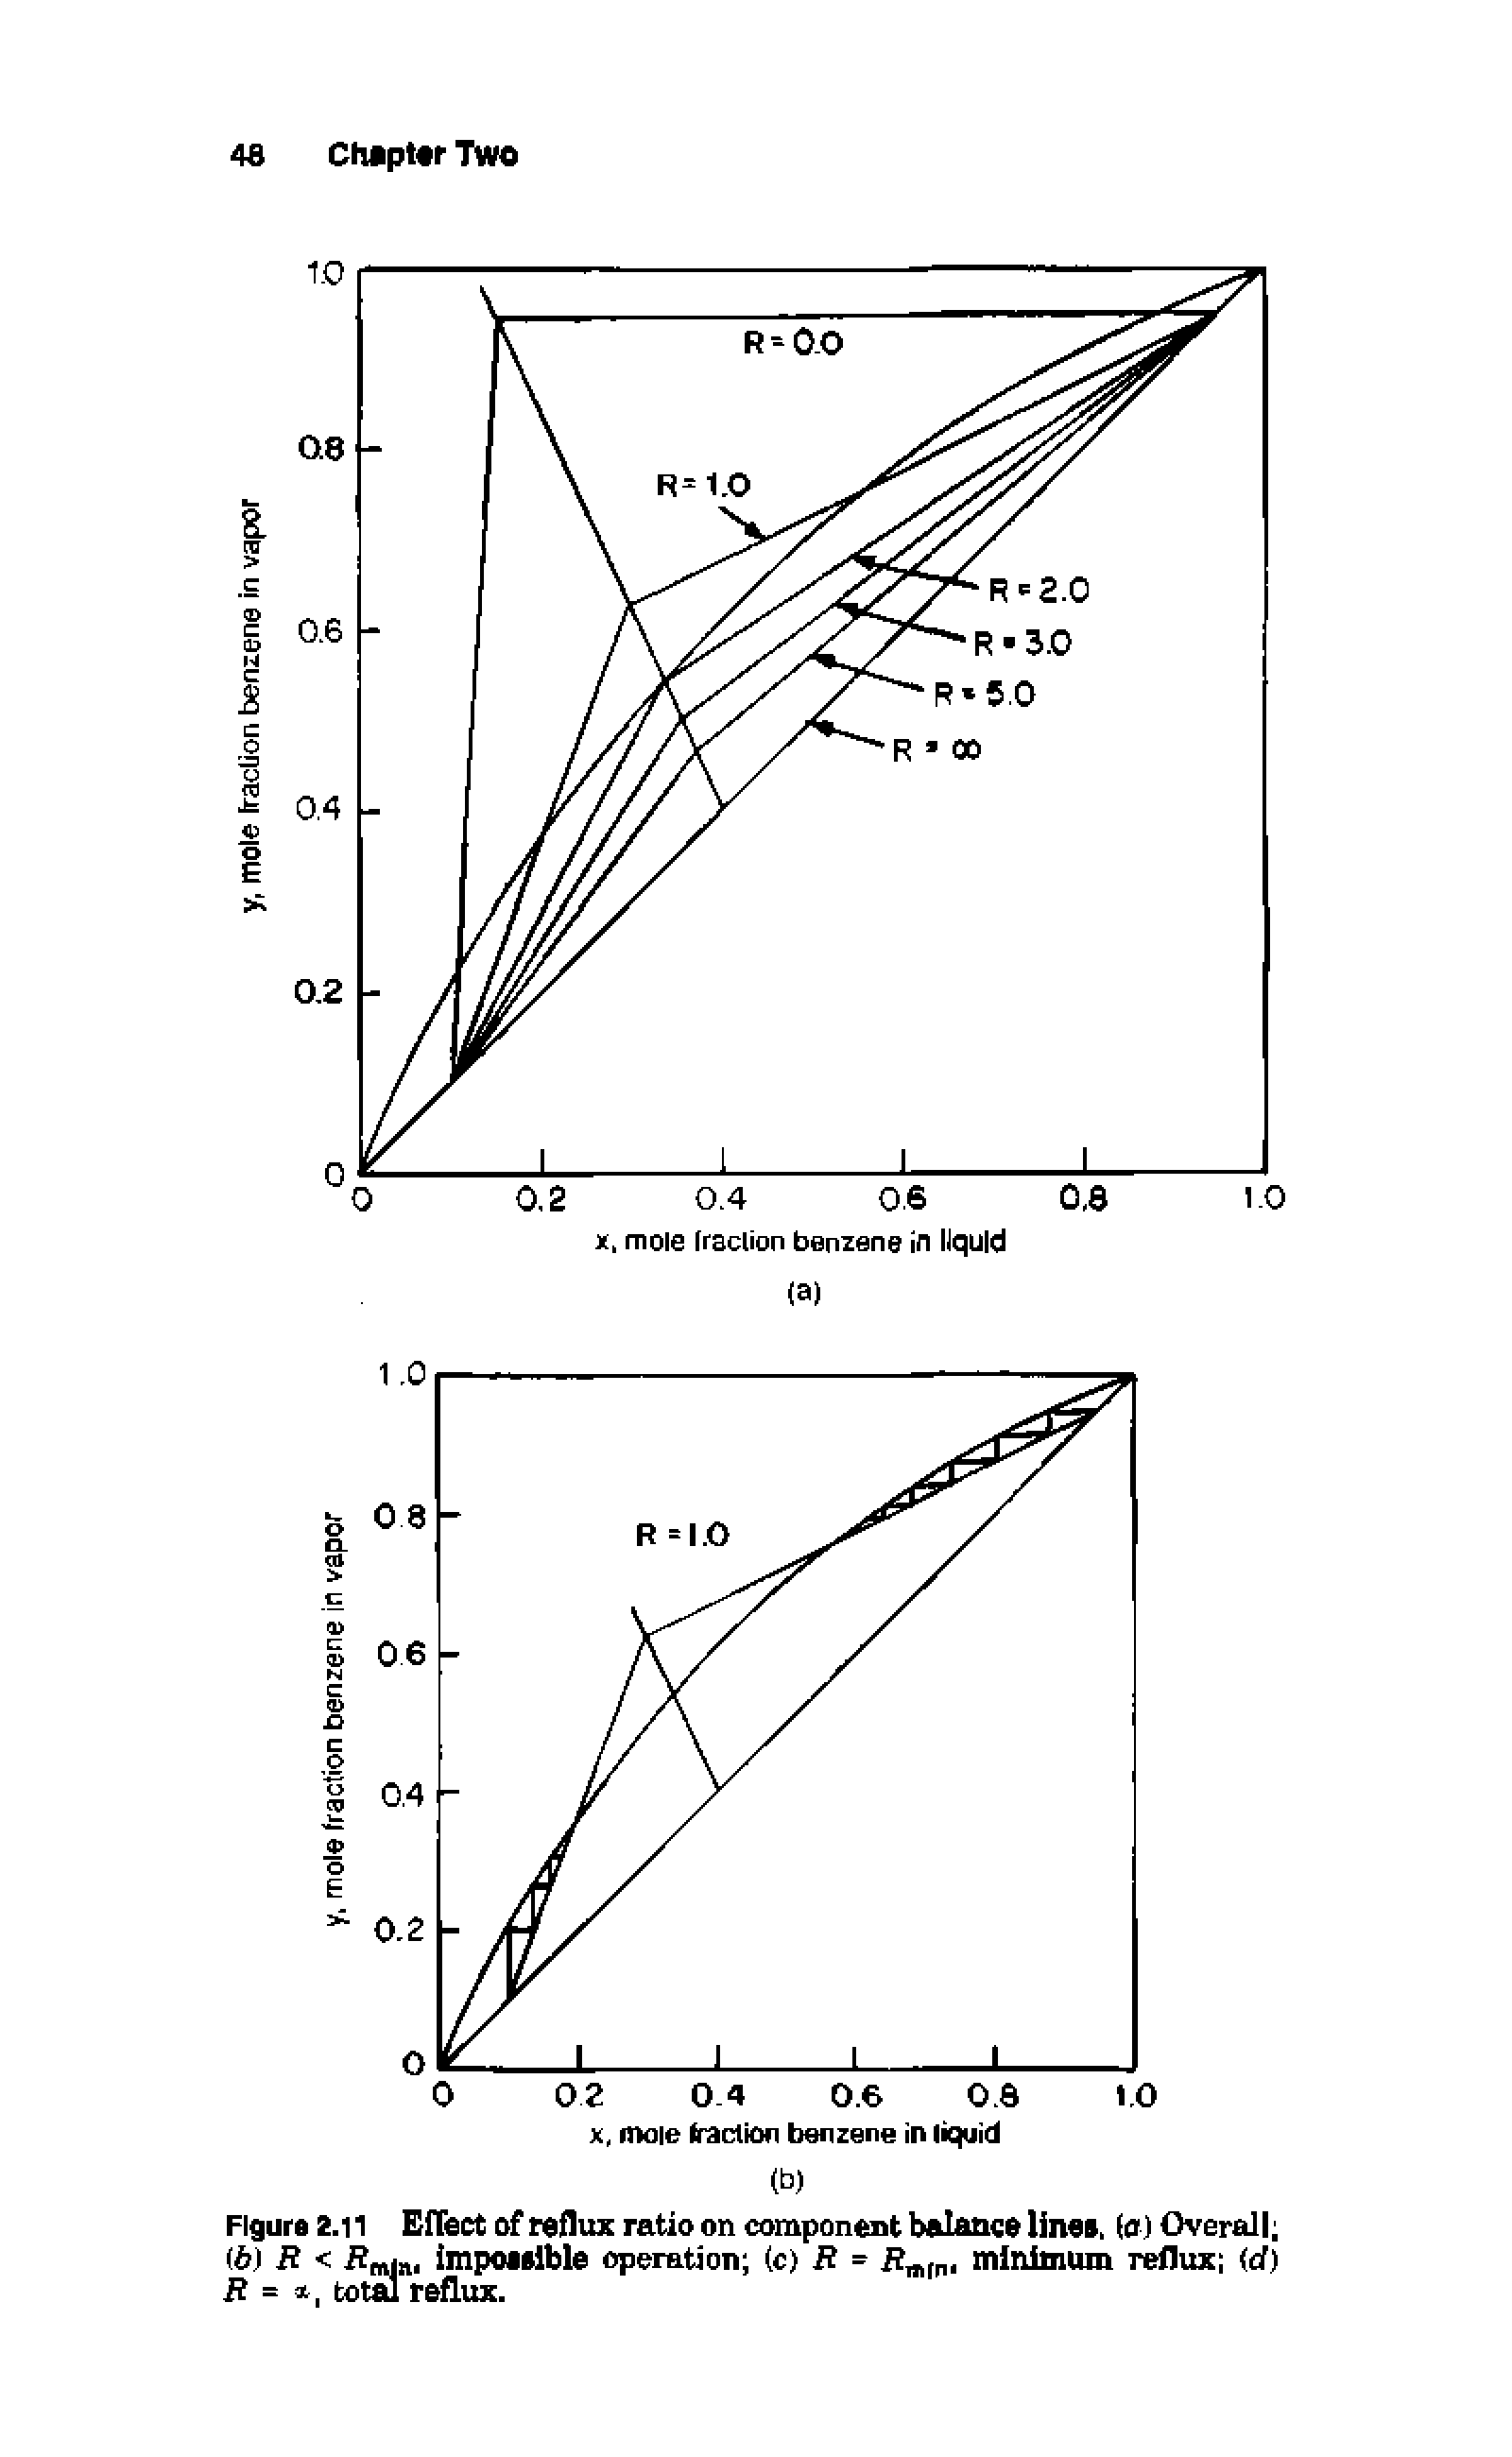 Figure 2.11 Effect of reflux ratio on component balance lines, (a) Overall (b) R < Amin, impossible operation (c) R = minimum reflux <ef) R =, total reflux.